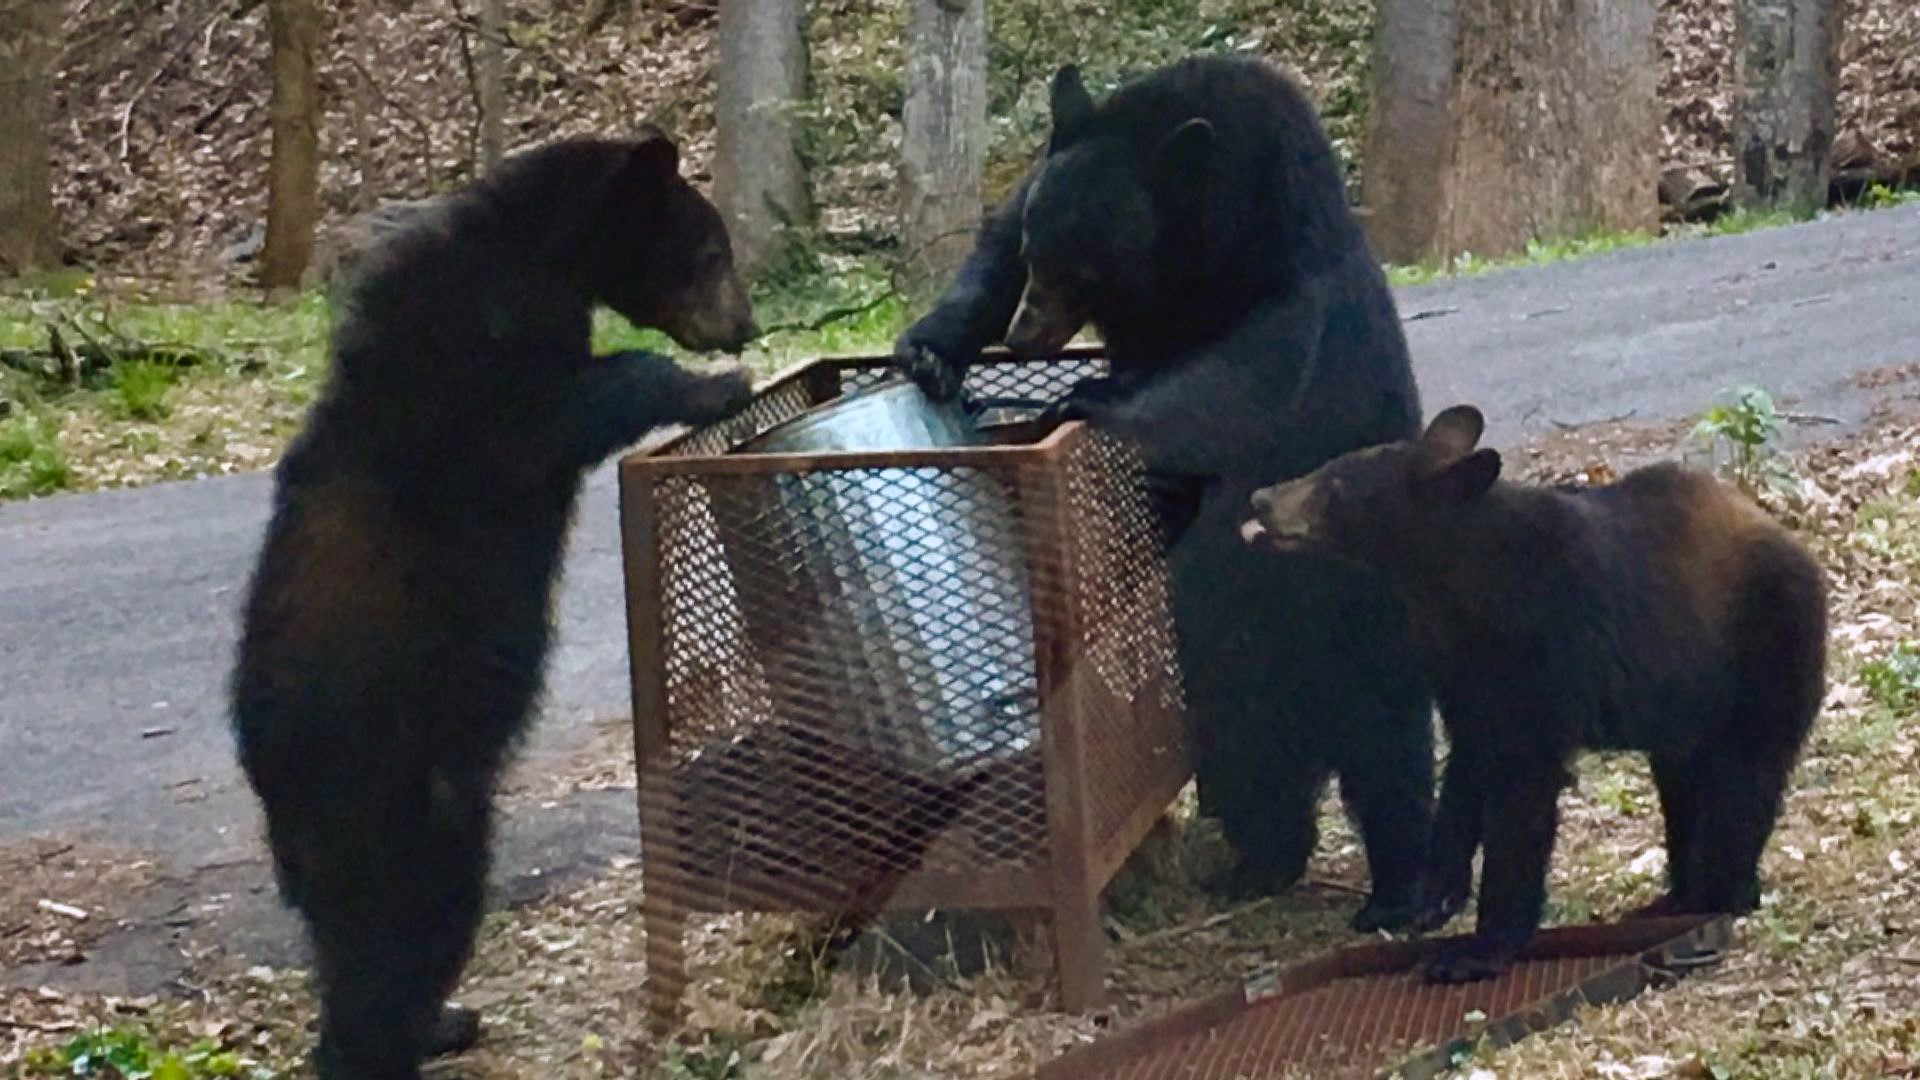 The BearWise taskforce aims to educate visitors on bear safety and expand bear-proof trash ordinances throughout the areas surrounding the Great Smoky Mountains.